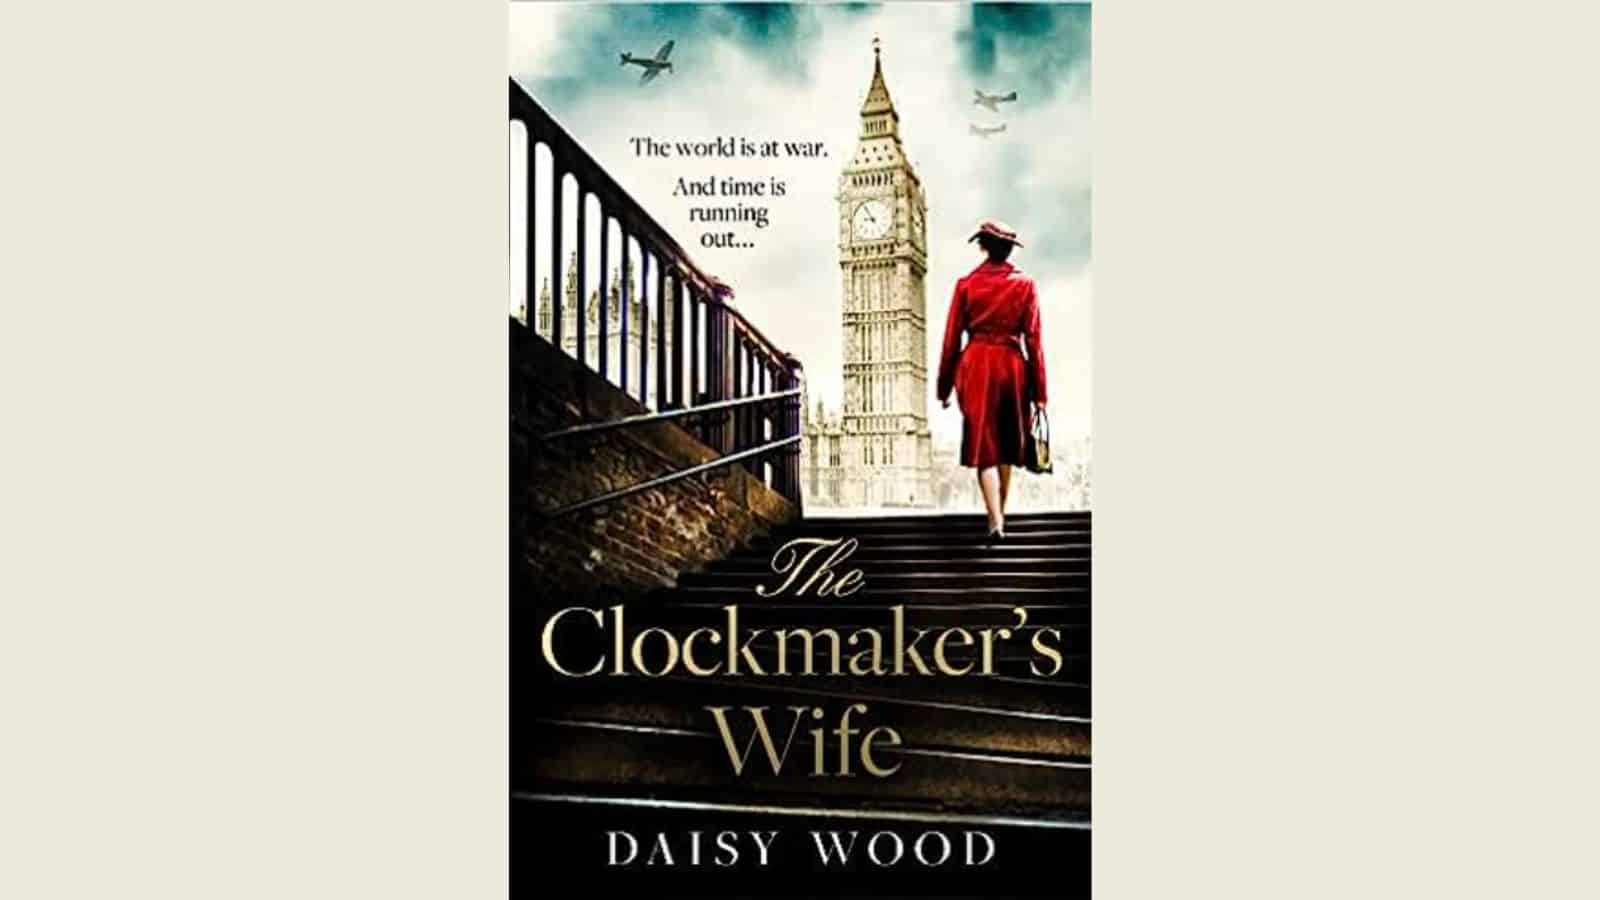 The Clockmaker's wife